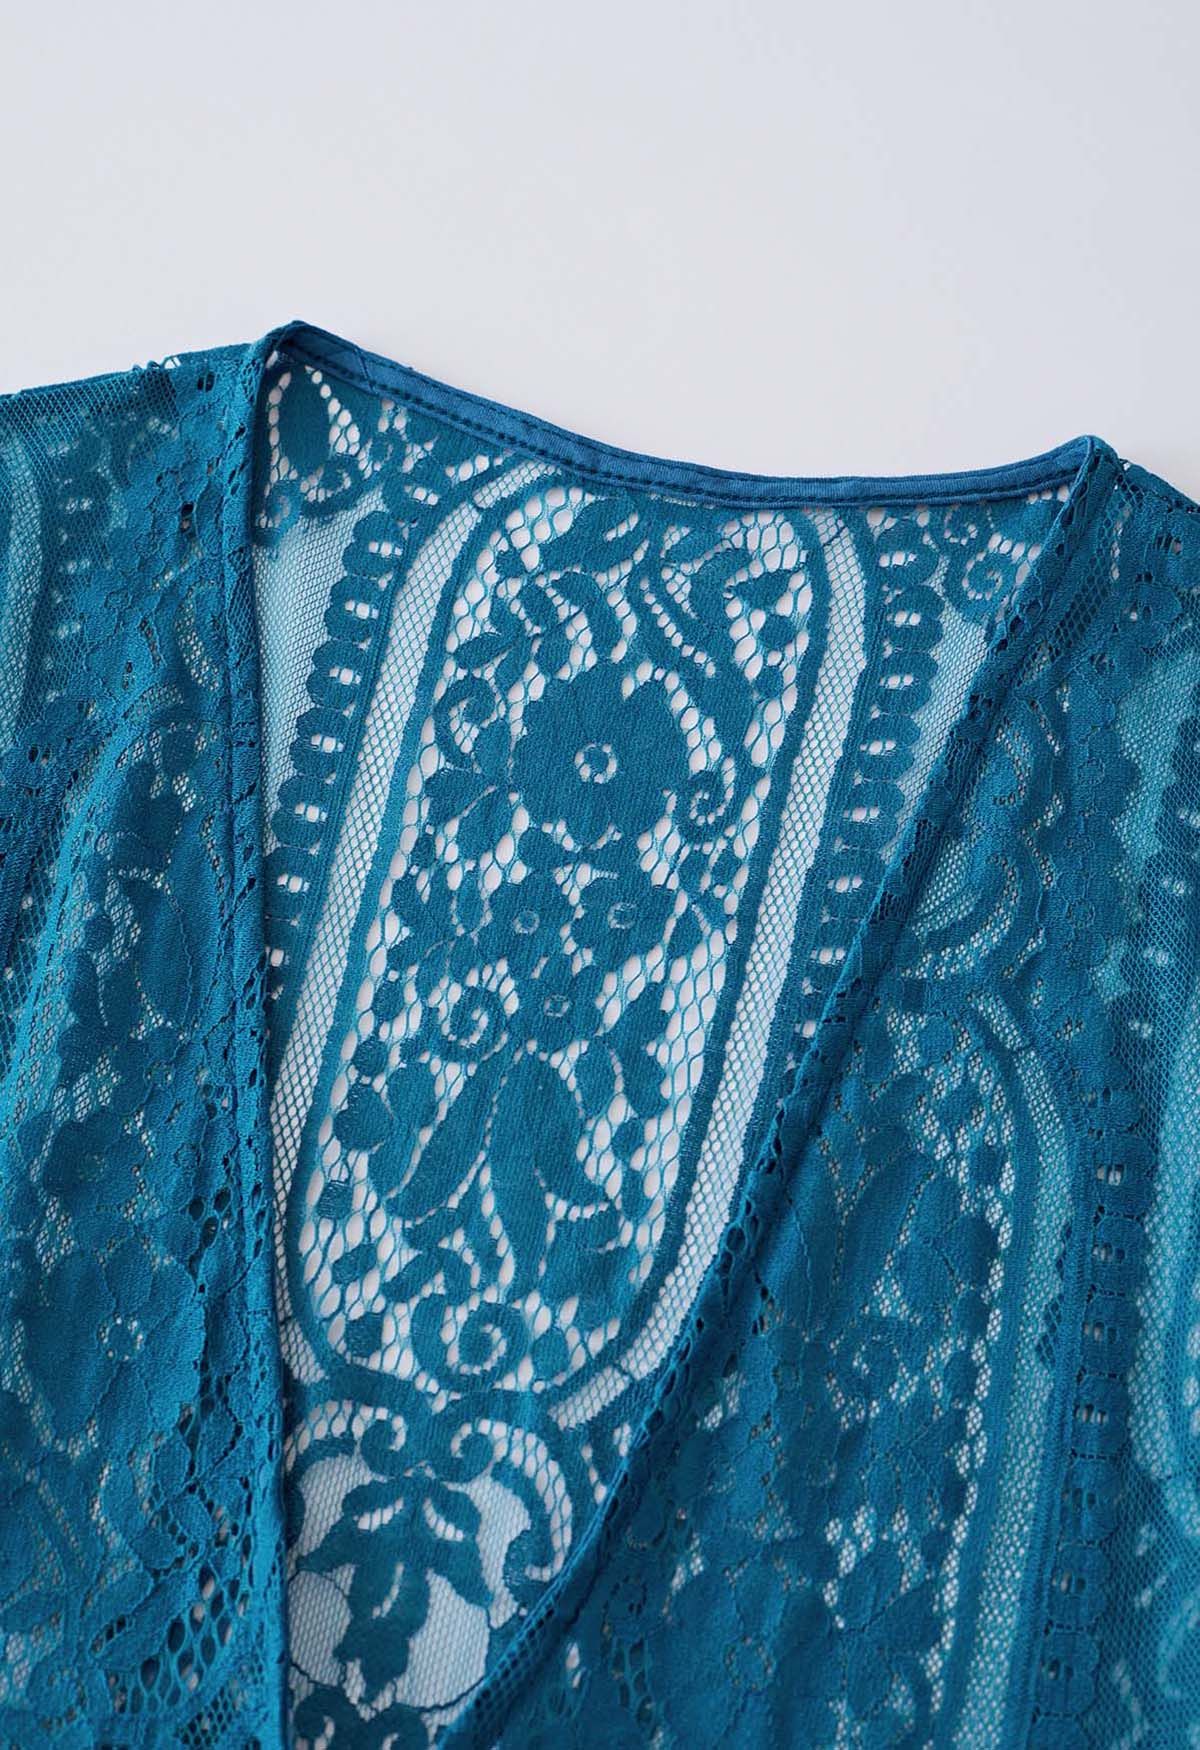 Slit Cuffs Floral Lace Kimono in Teal